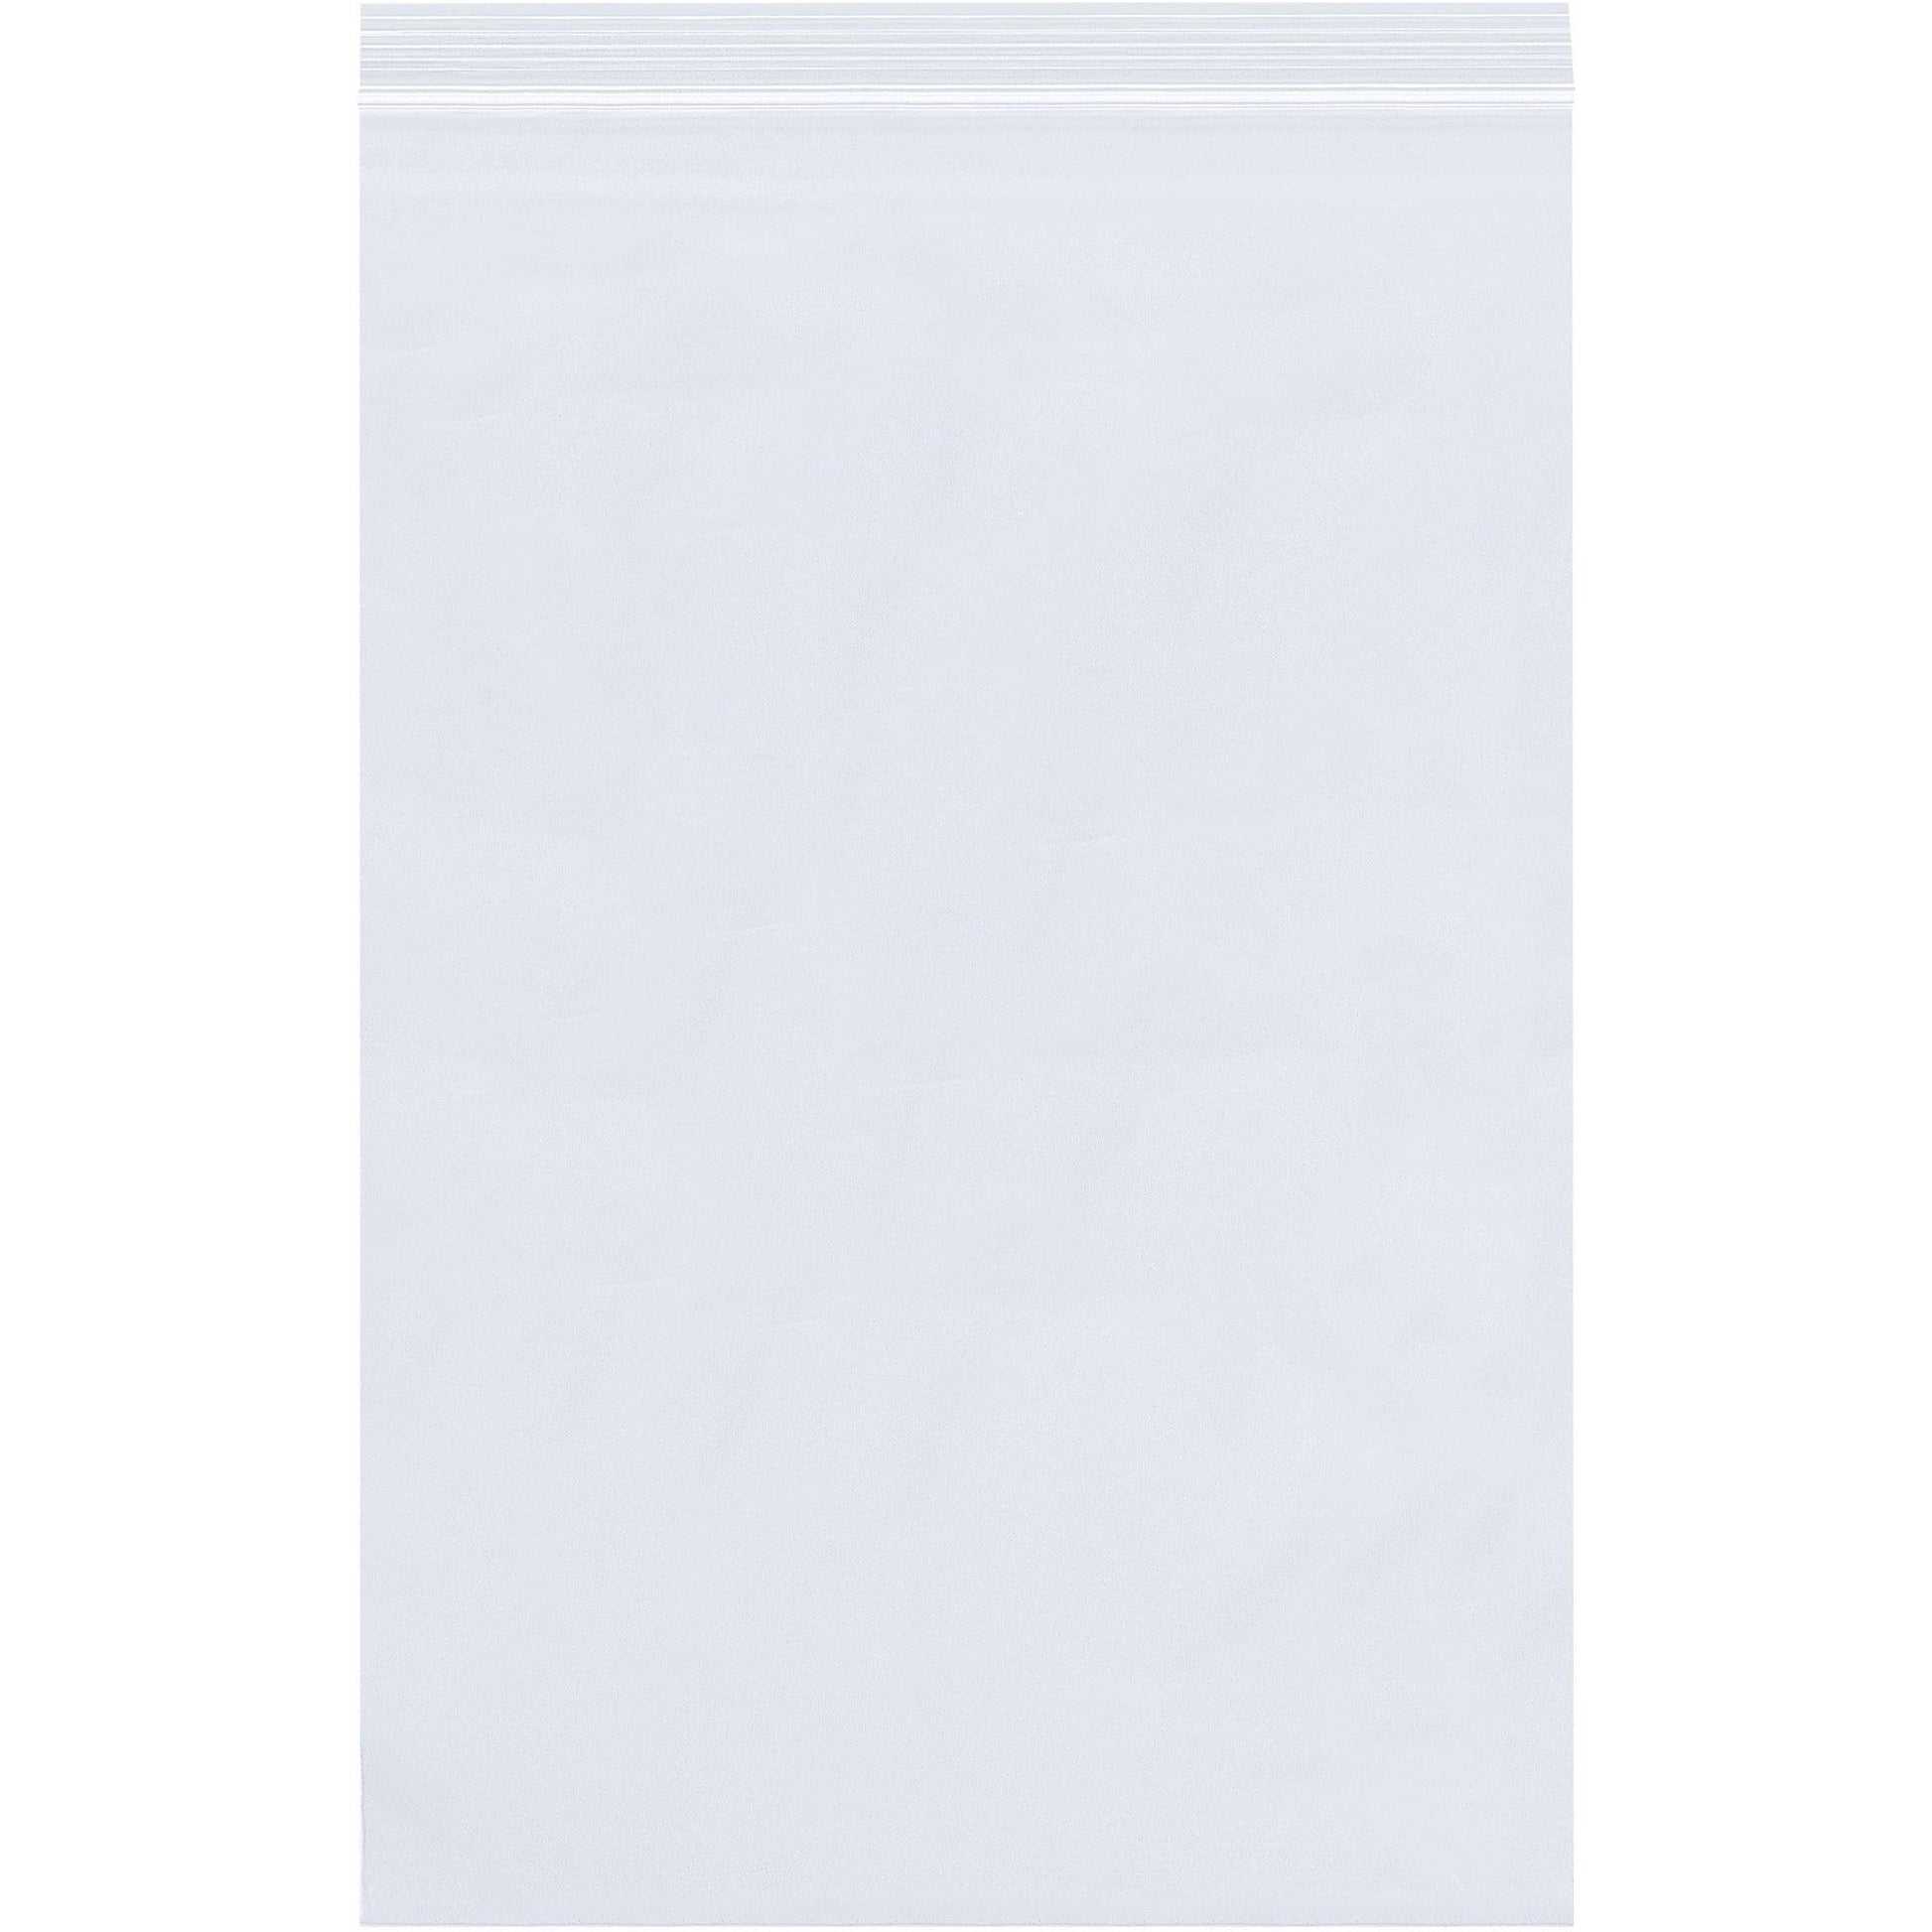 8 x 18" - 2 Mil Reclosable Poly Bags - PB3603